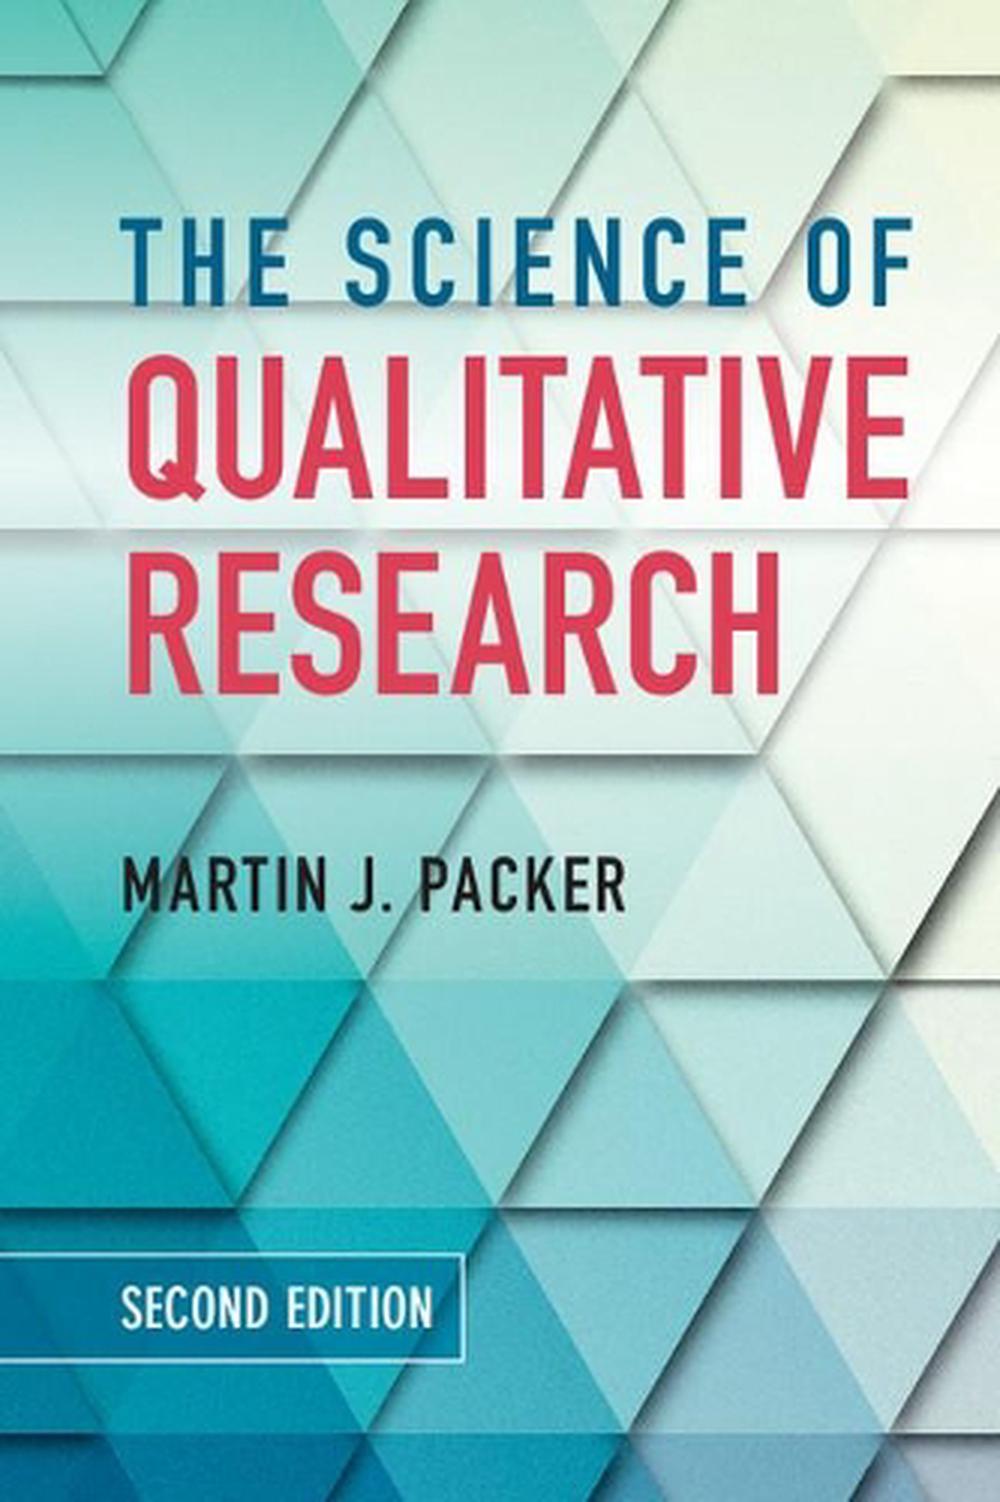 qualitative research title about science